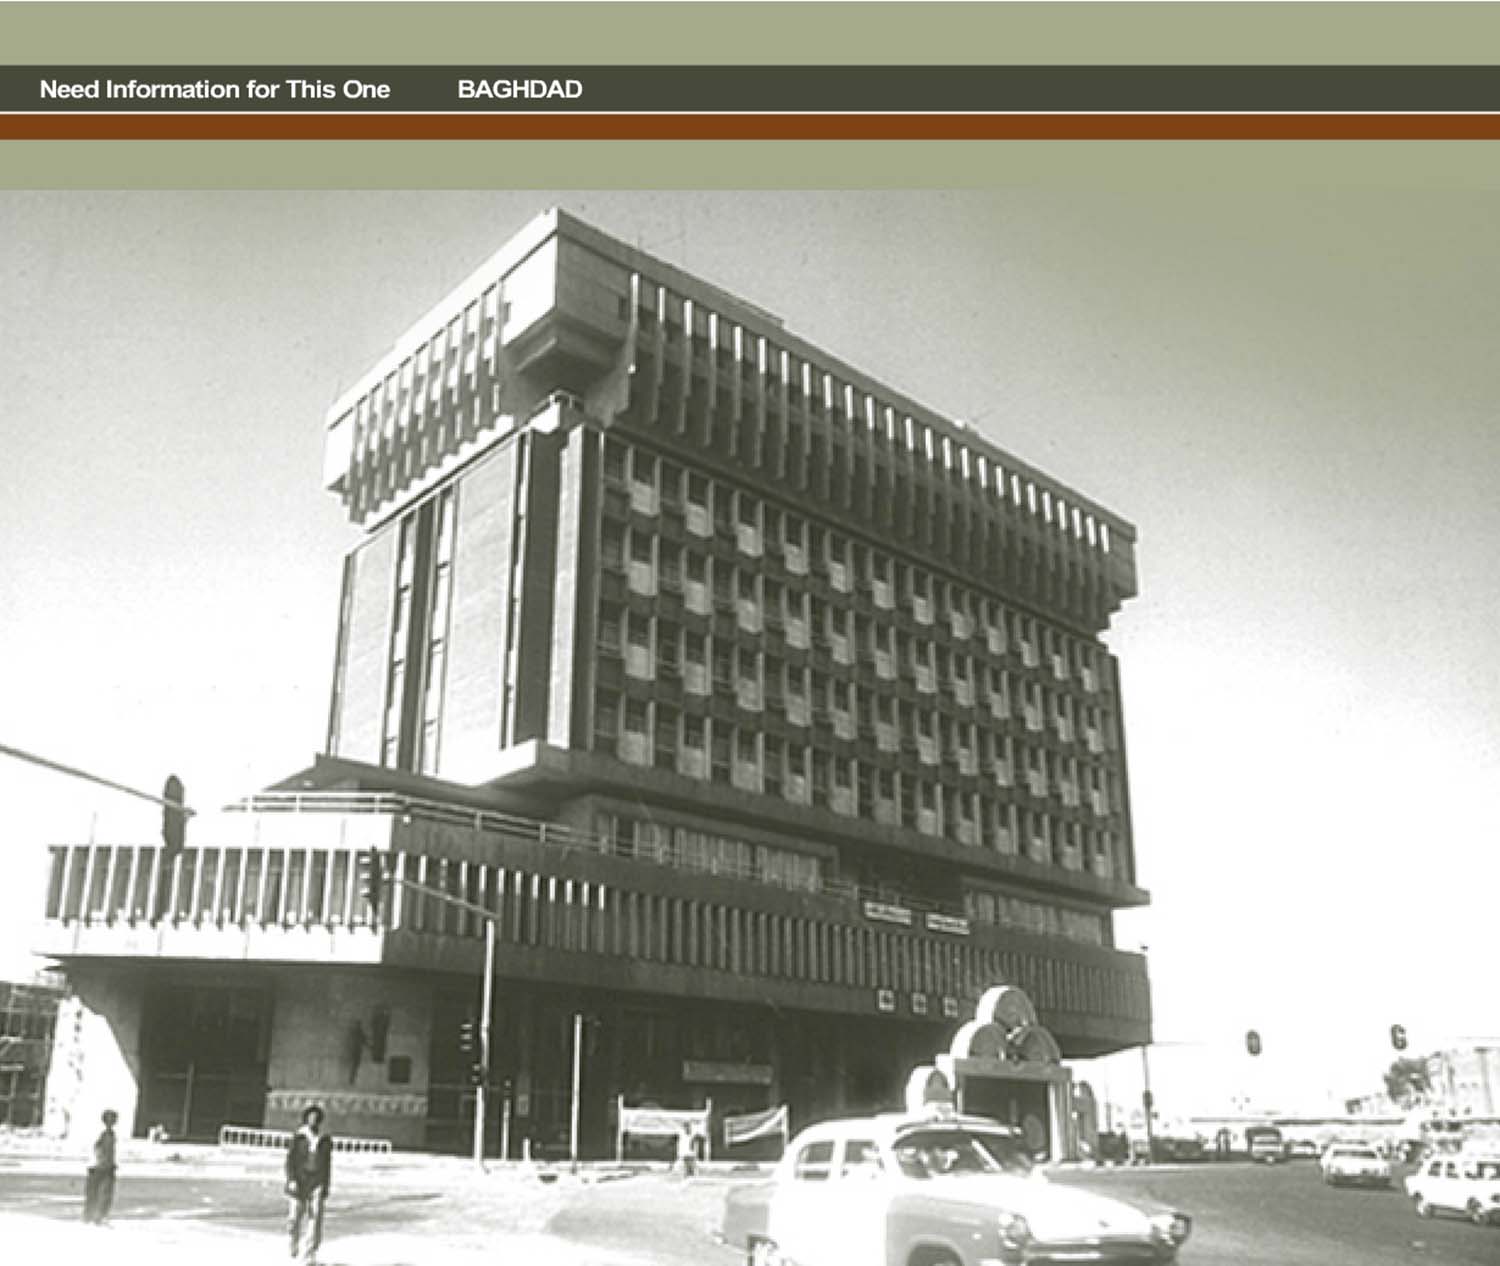 Digital image from the online project portfolio of Hisham Munir and Associates, showing the building's facade. 